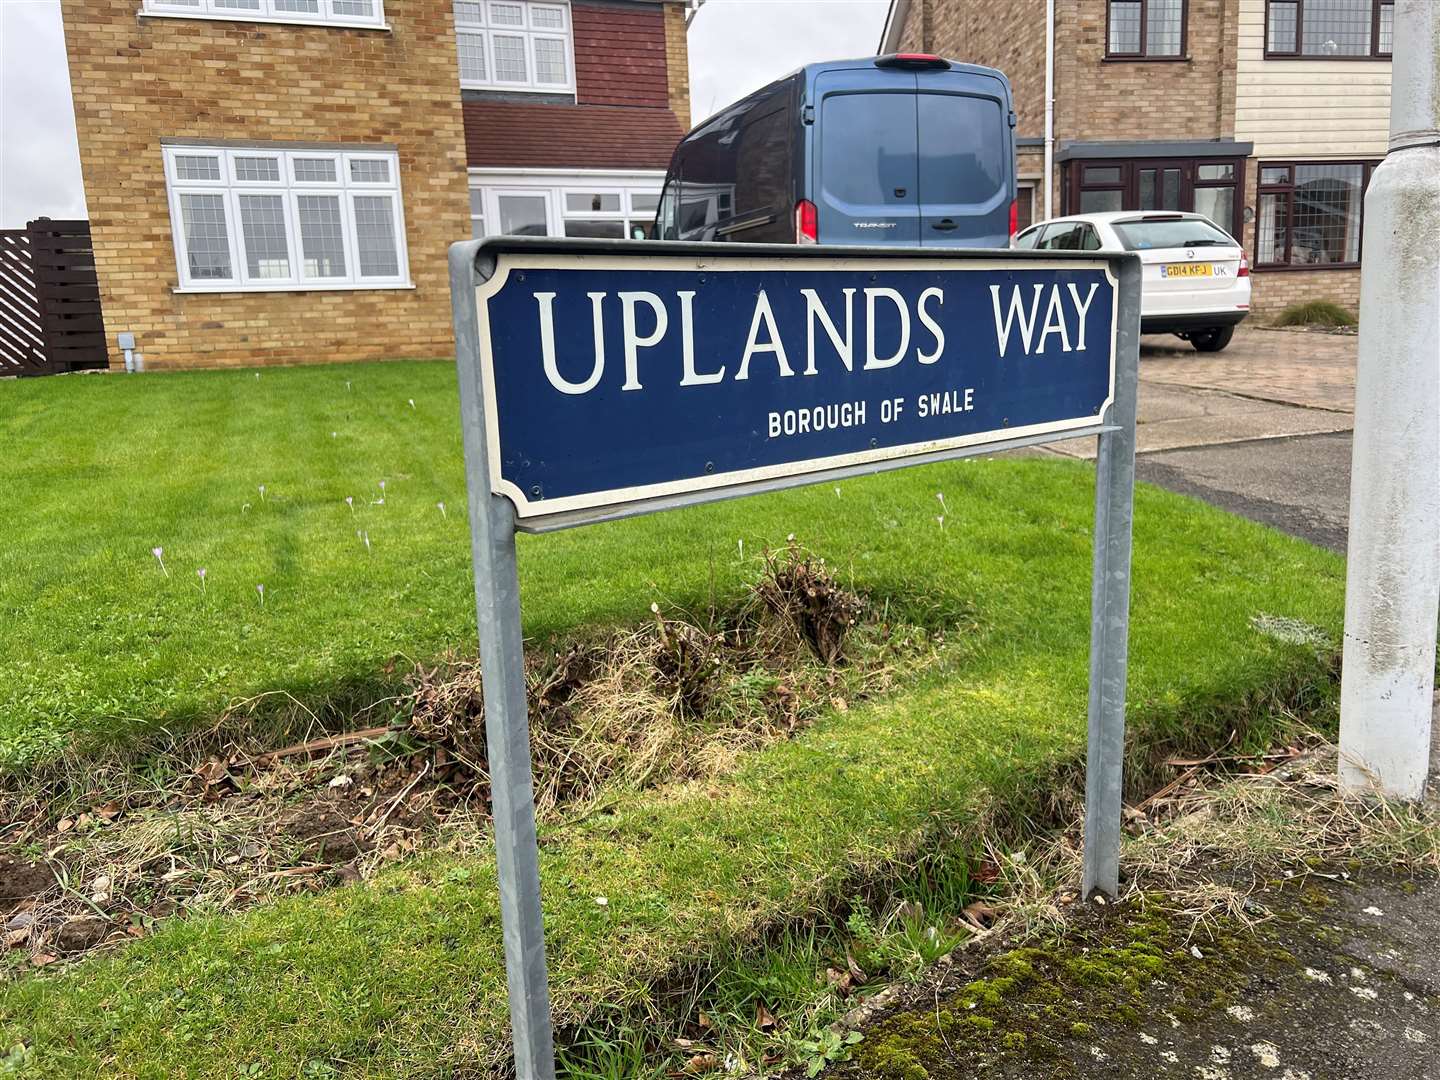 Uplands Way on Sheppey was listed for sale